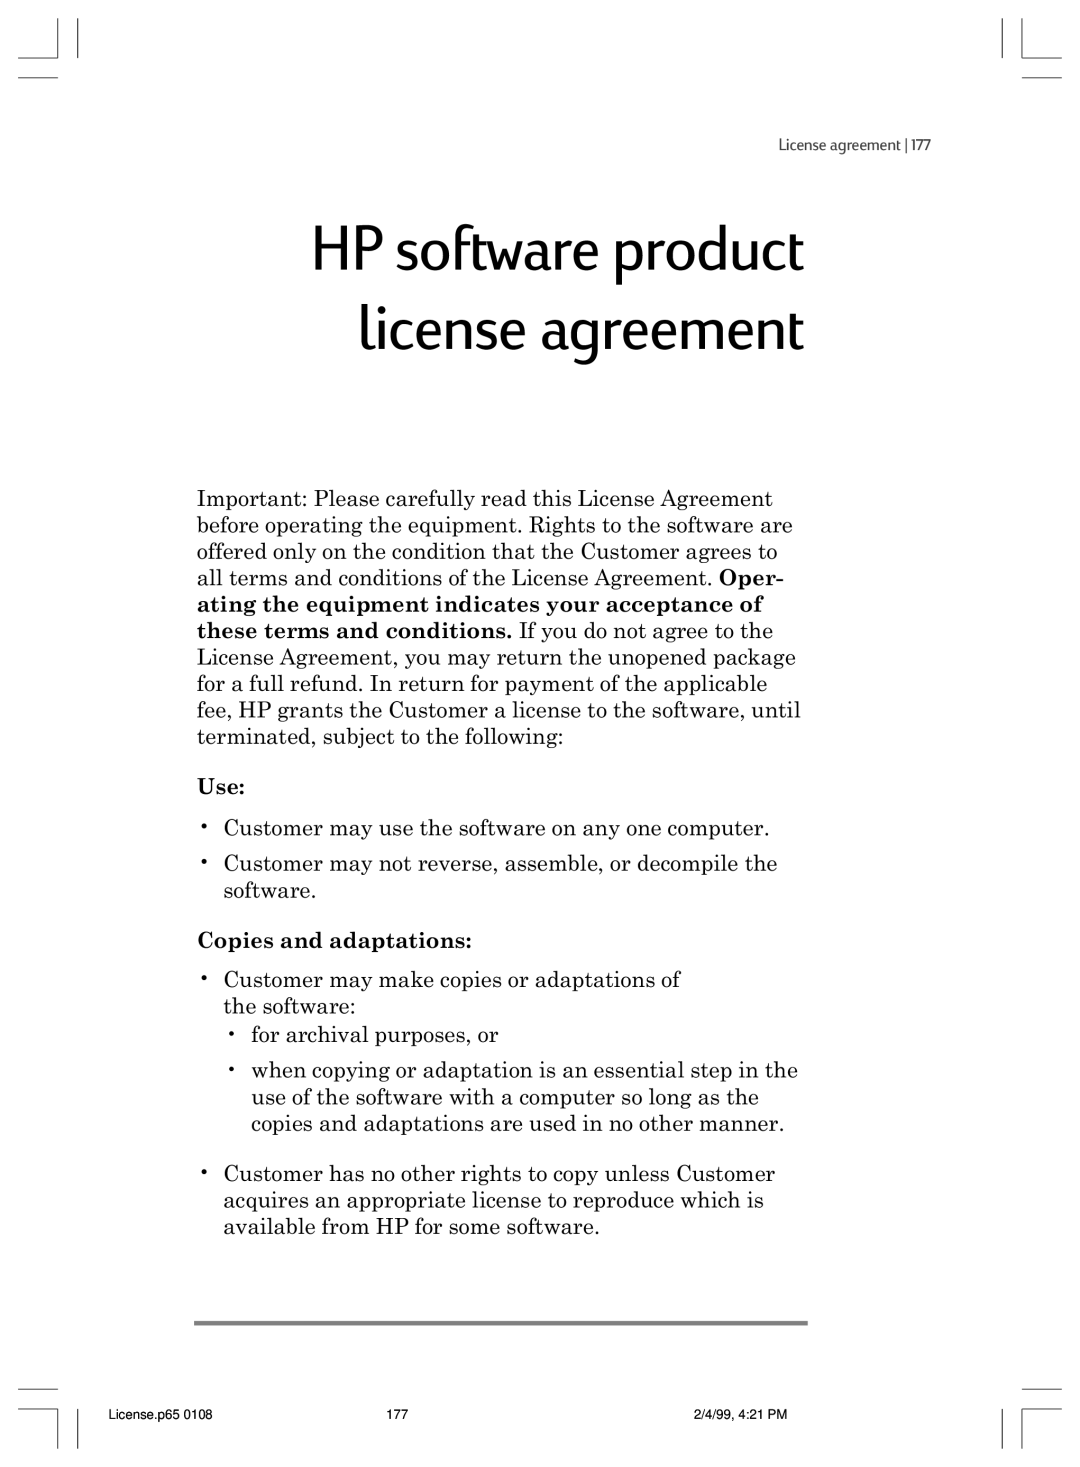 HP 820 E manual HP software product license agreement, Copies and adaptations 